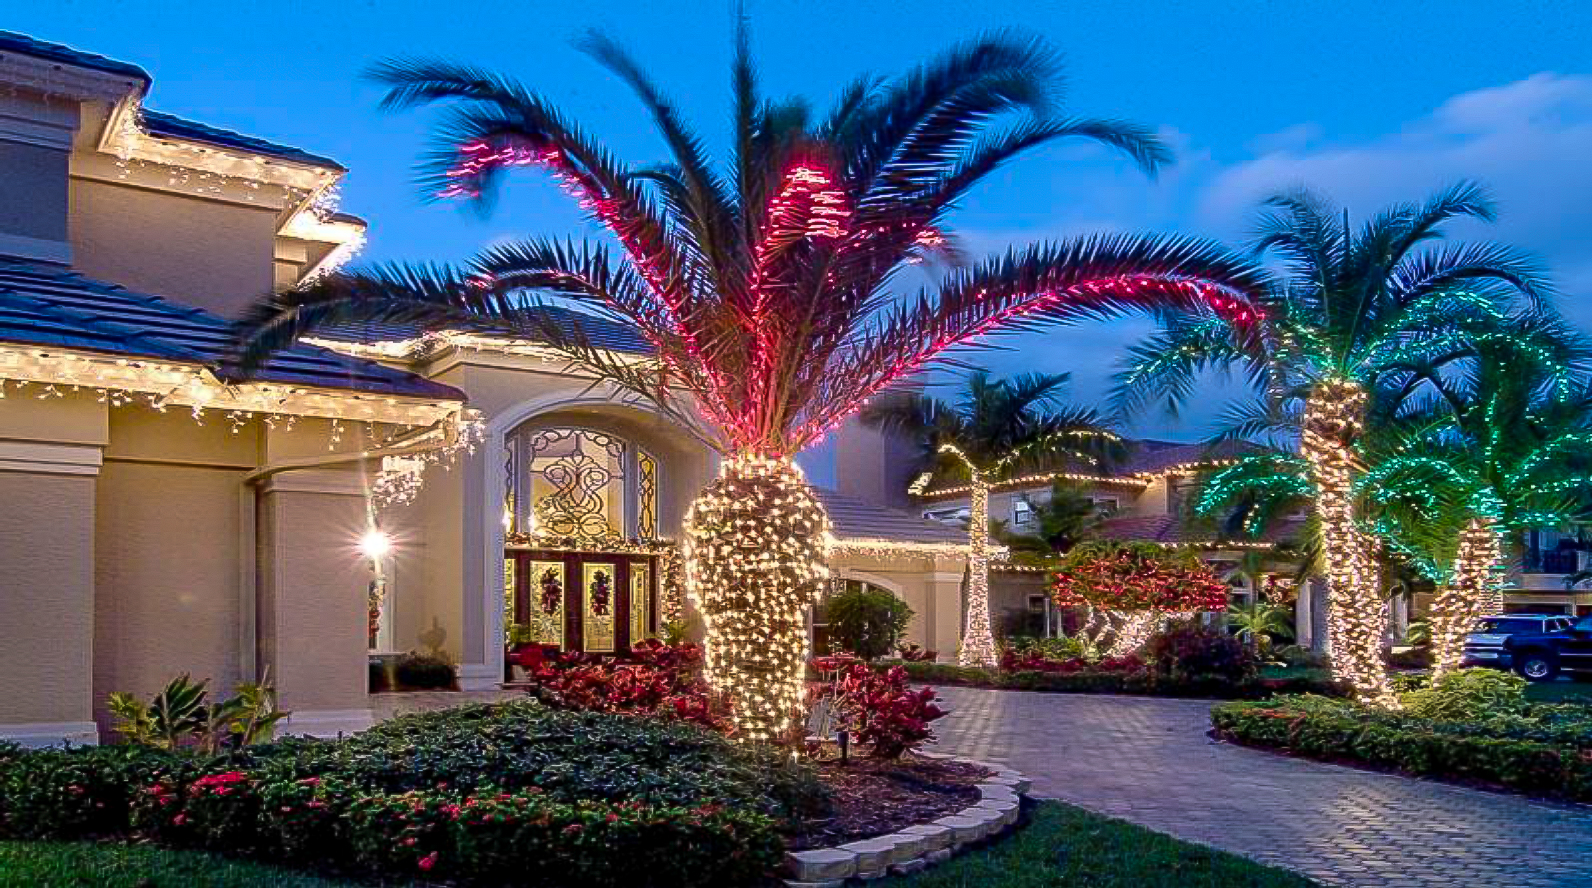 Palm-trunk-wrapped-with-LED-Minis-Frond-with-LED-Minis-Staked-C9-lighting-alternating-Red-Green-and-Warm-White-C9-www.decoratingelves.com